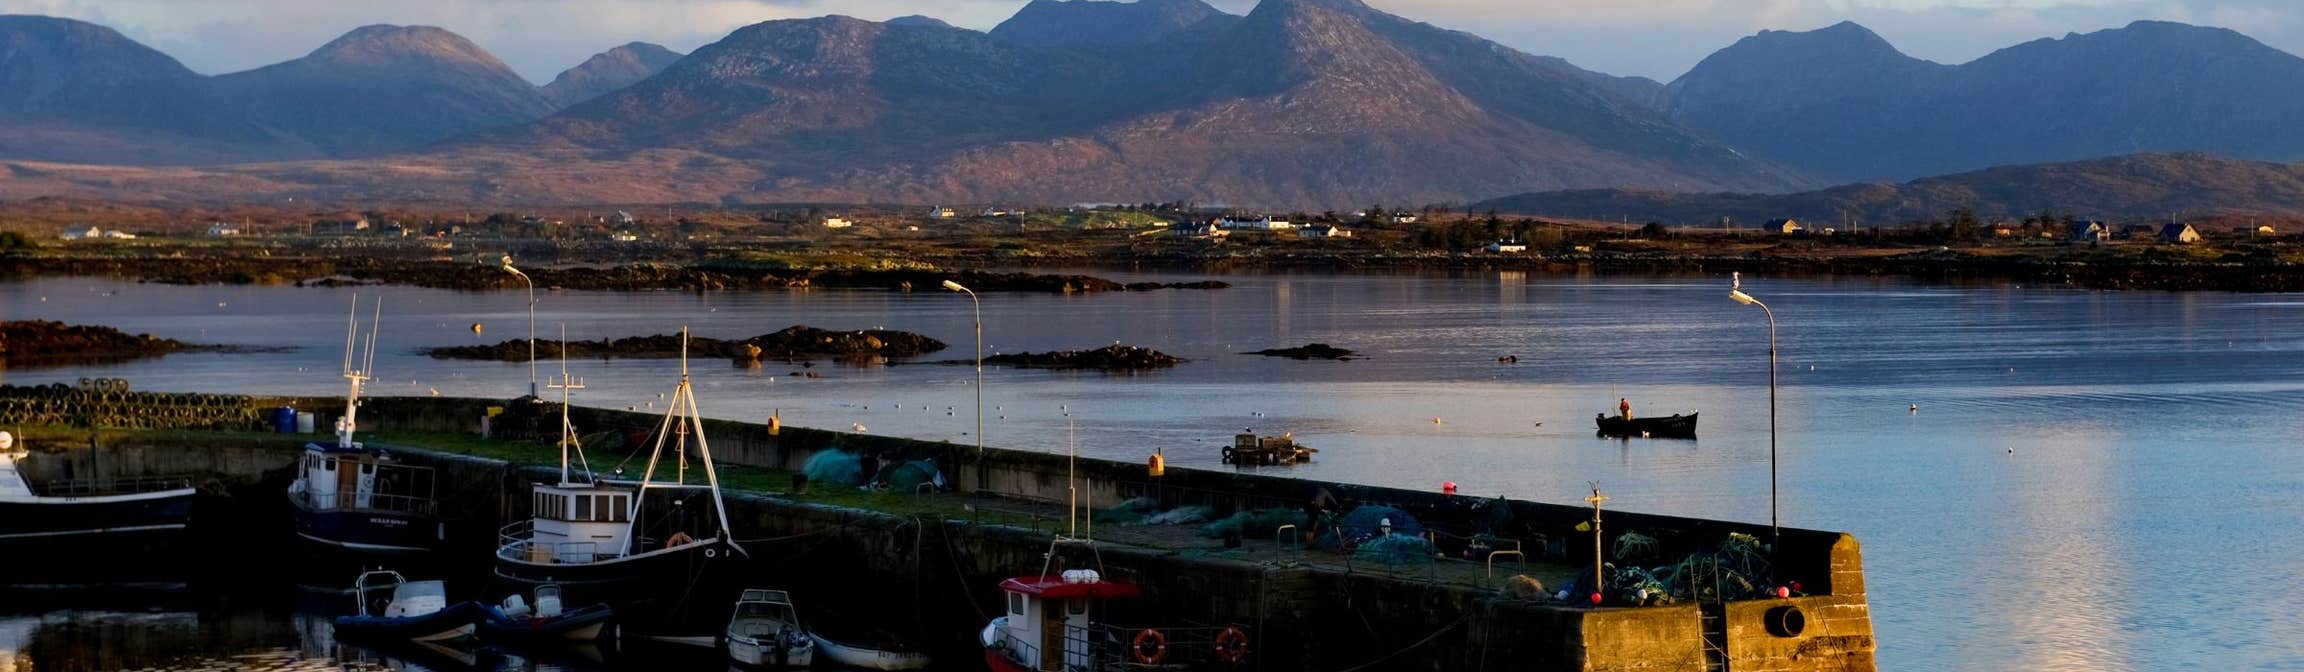 Image of Roundstone in County Galway